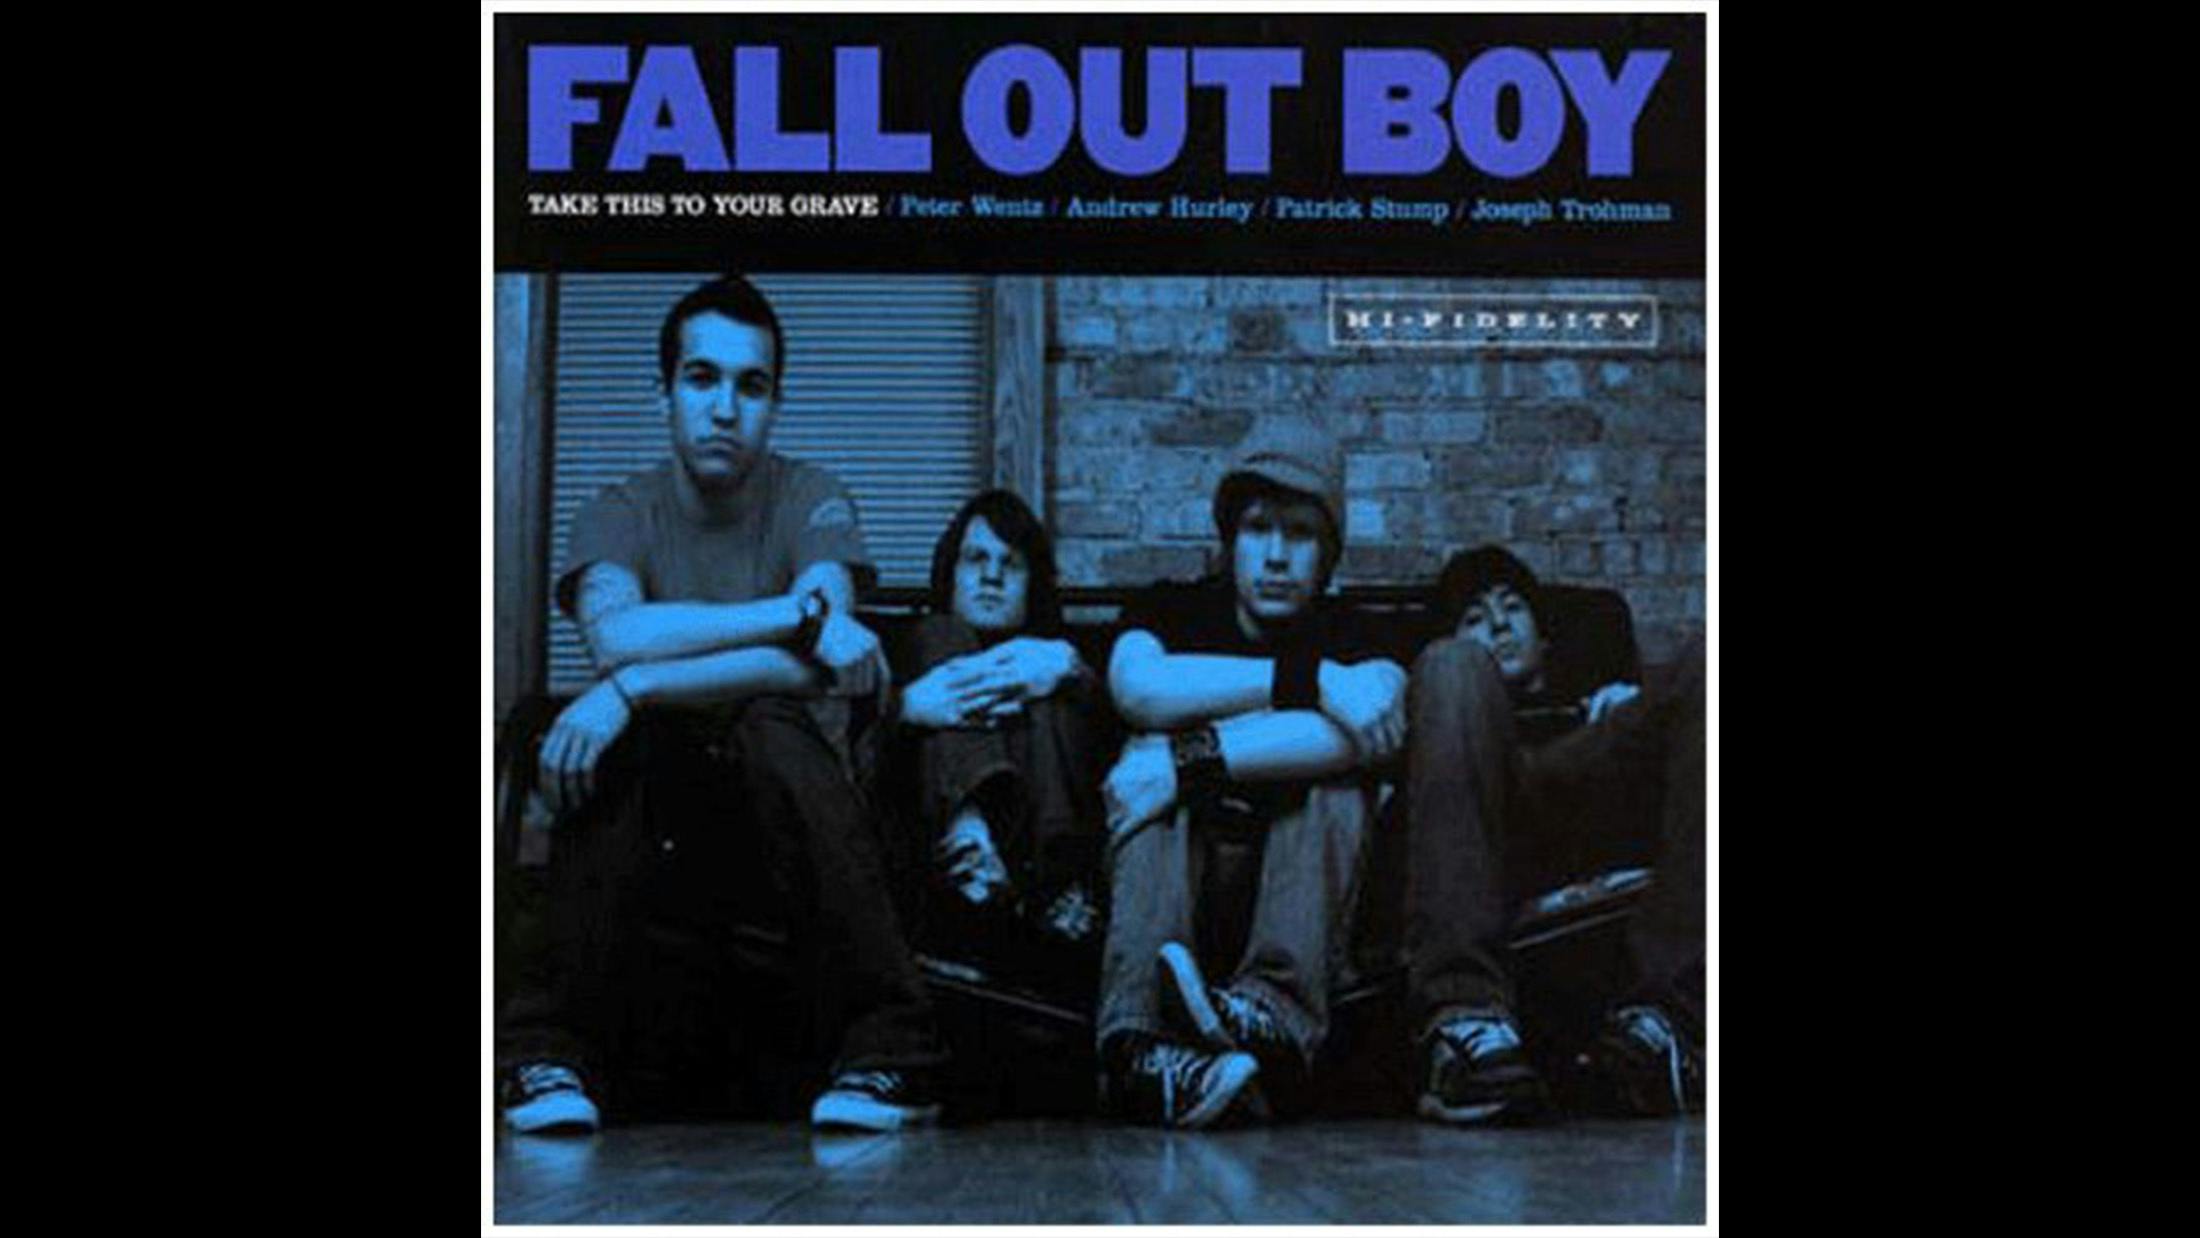 After a 14-year career and six albums, the fact Fall Out Boy still close every single show with a Take This To Your Grave track (Saturday) is testament to its brilliance. Inspired by a terrible break-up for Pete Wentz, this 2003 debut is furious, bitter and like no other Fall Out Boy album. It’s the blueprint for both break-up records and timeless pop-punk.  